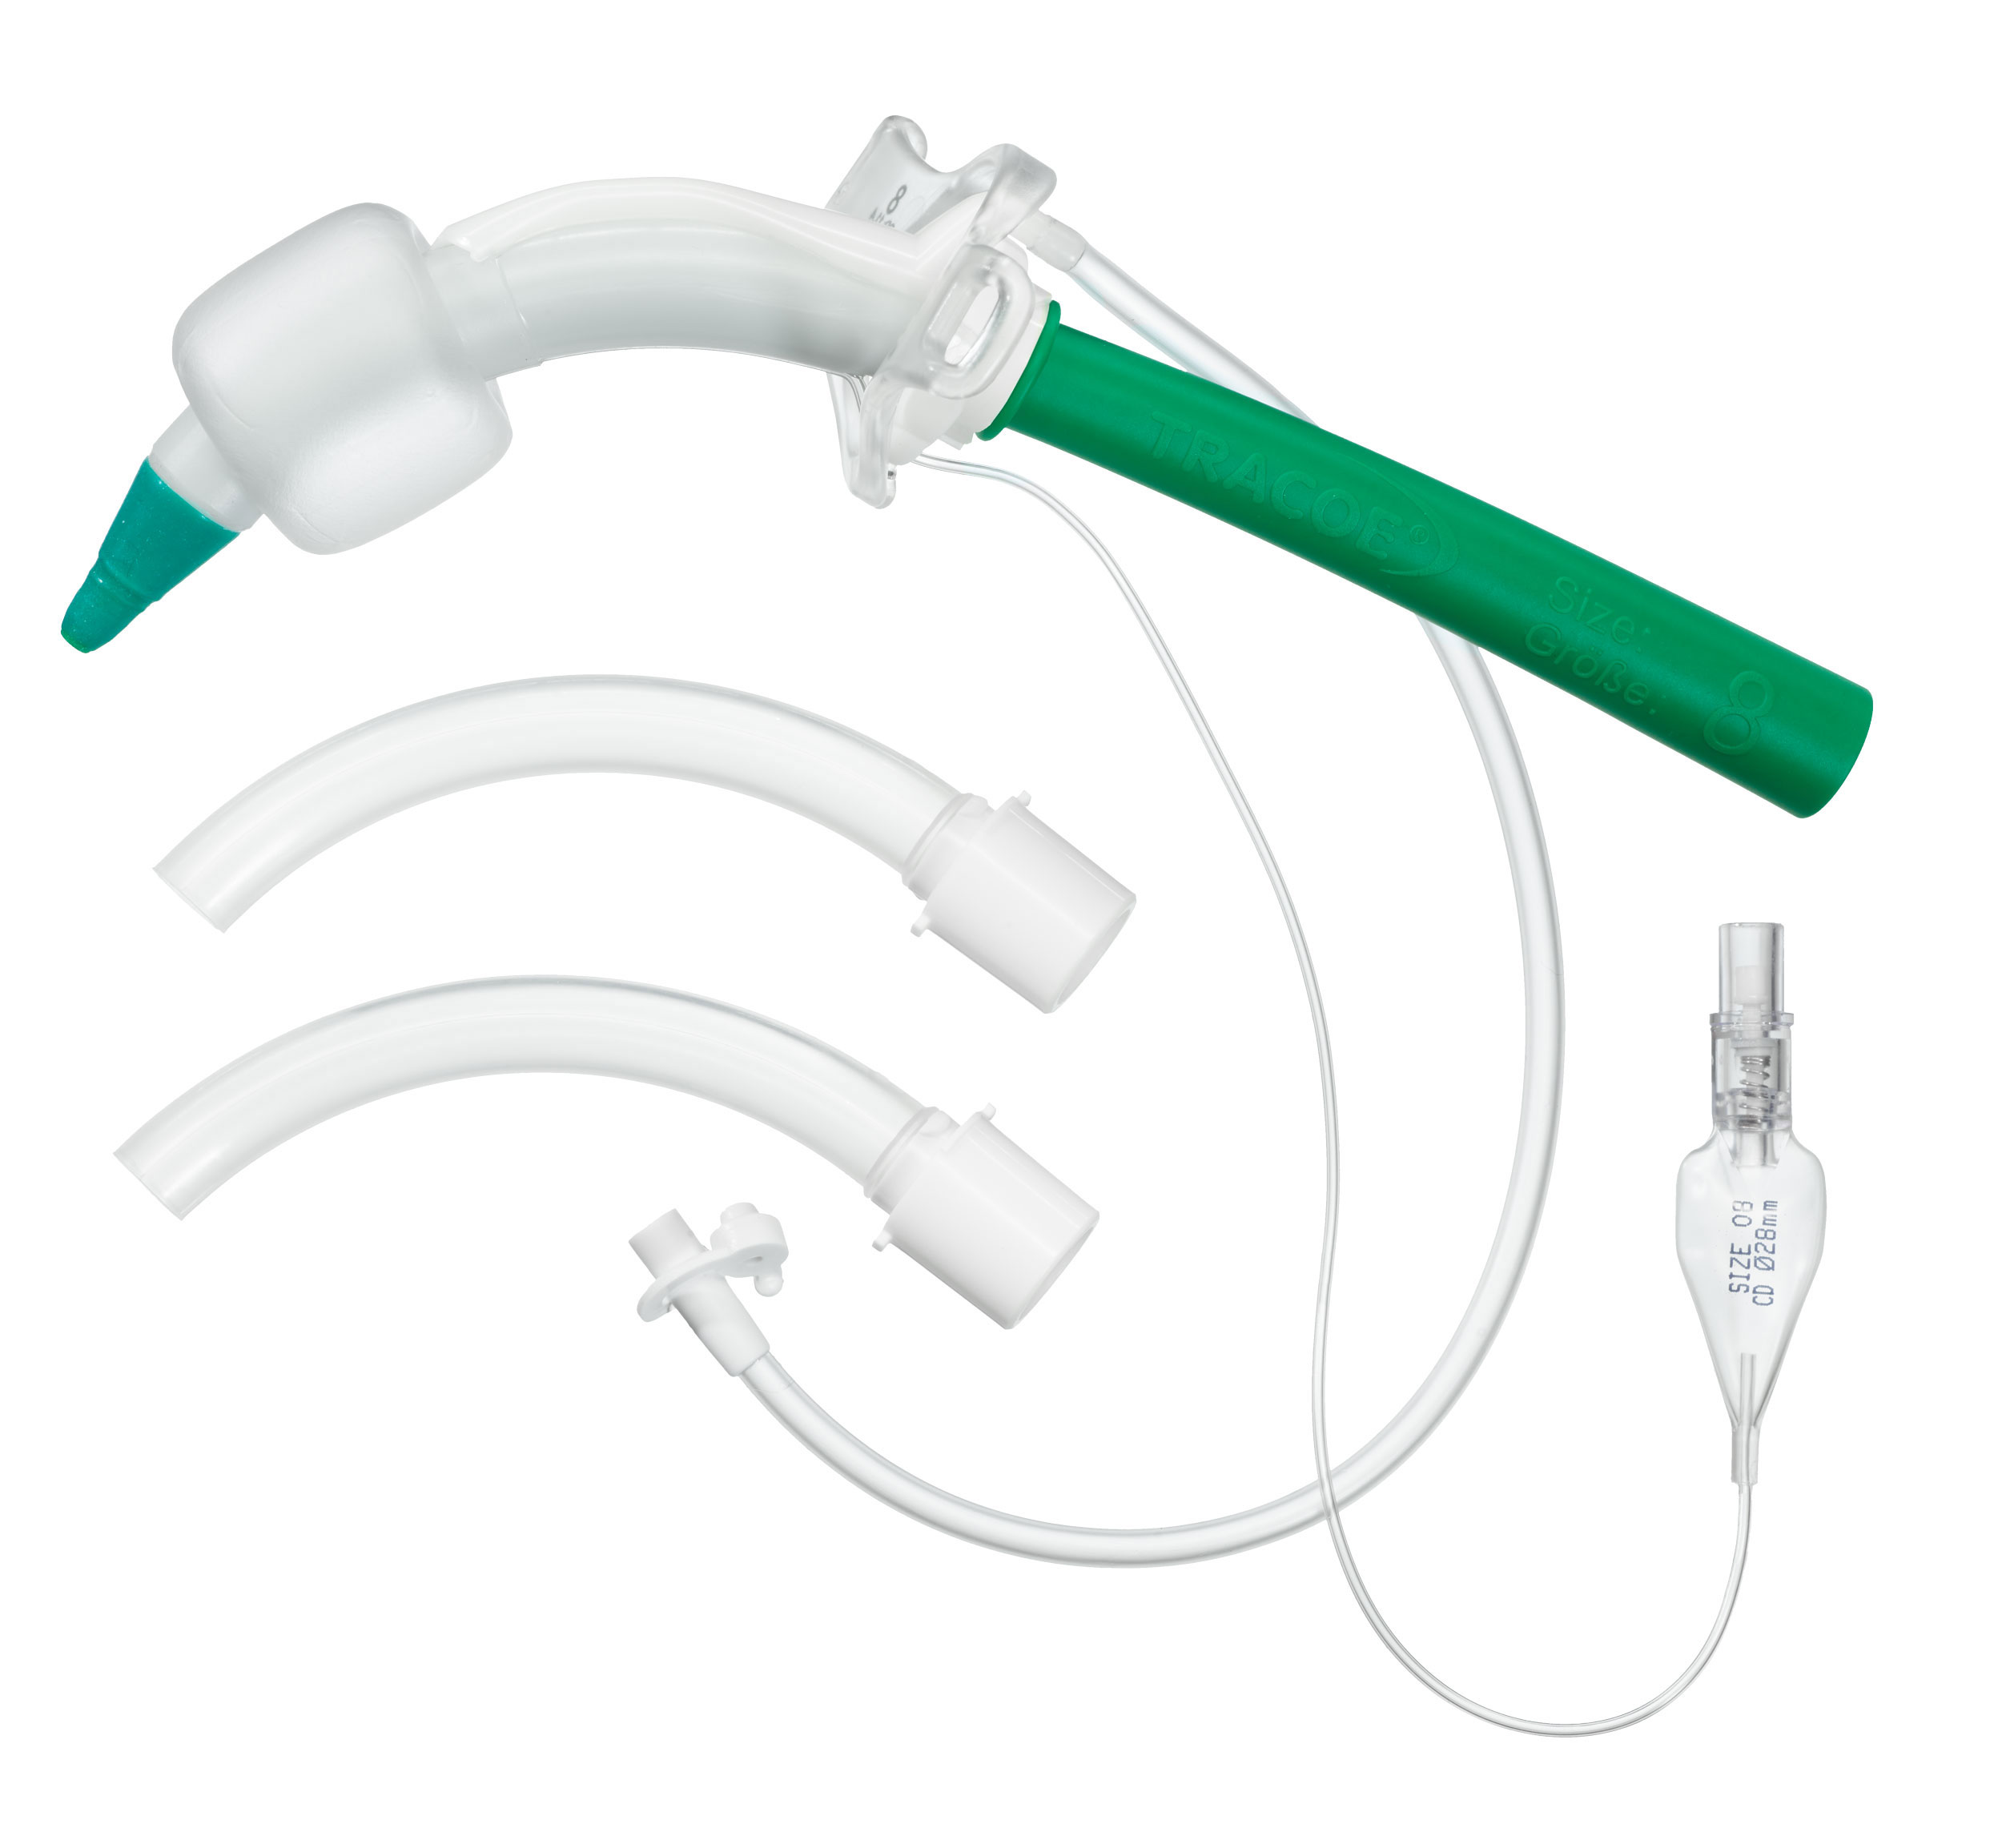 Dilation set + tracheostomy tube with low-pressure cuff, subglottic suction and minimally traumatic inserter